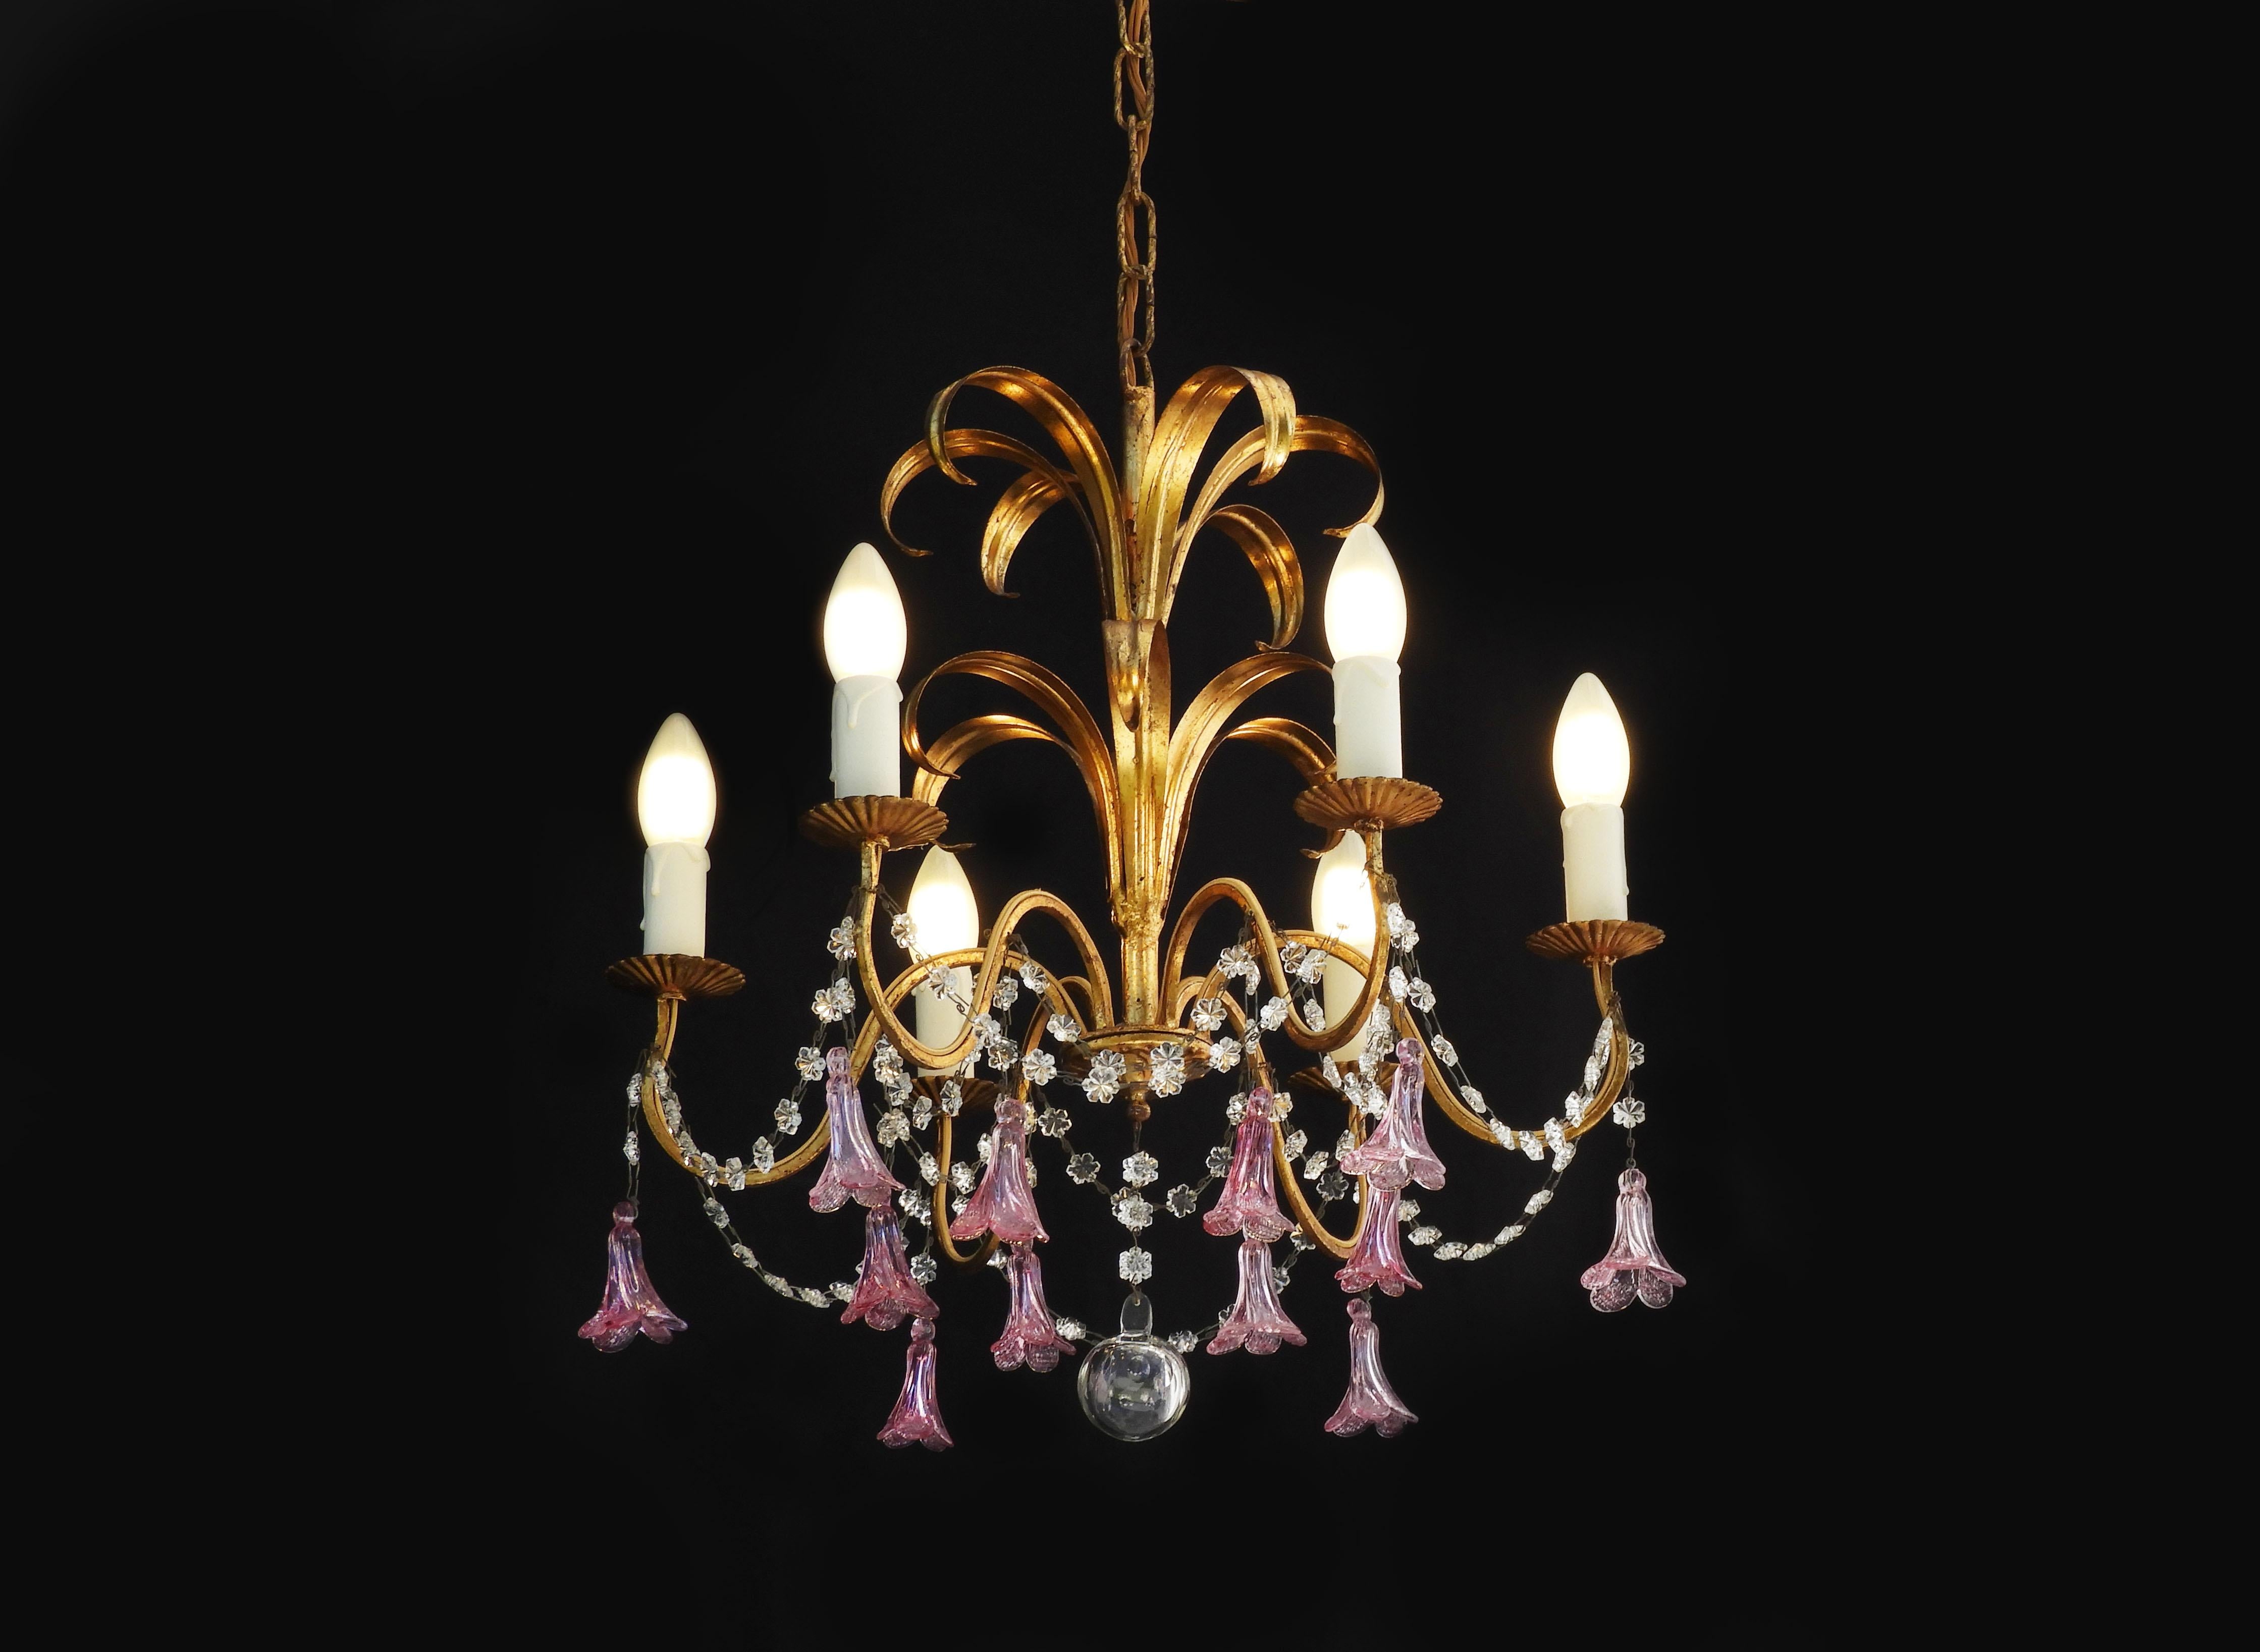 European French 6 Light Chandelier C1950, Pink Flower Pendant Drops And Gilded Tôle